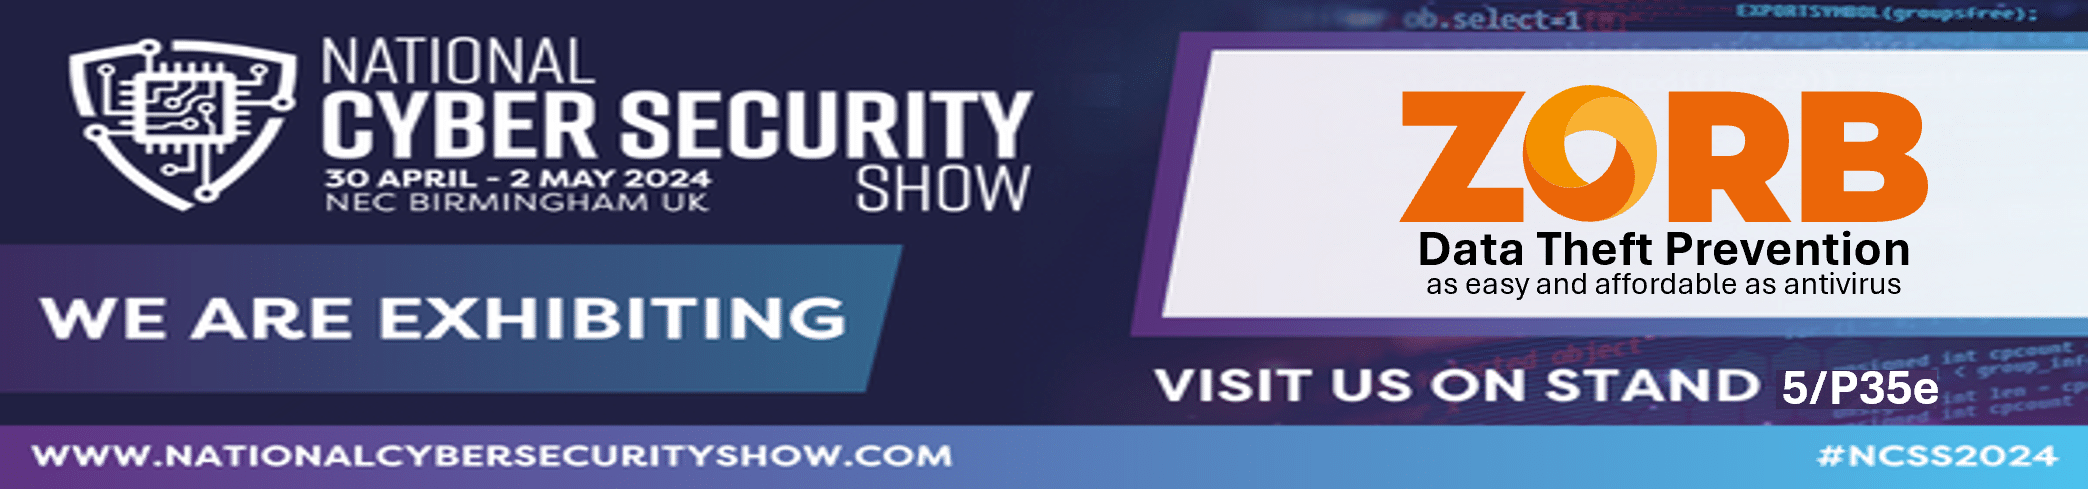 ZORB are exhibiting at the National Cybersecurity Show in Birmingham NEC on 30th April to 2nd May, stand 5/P35e